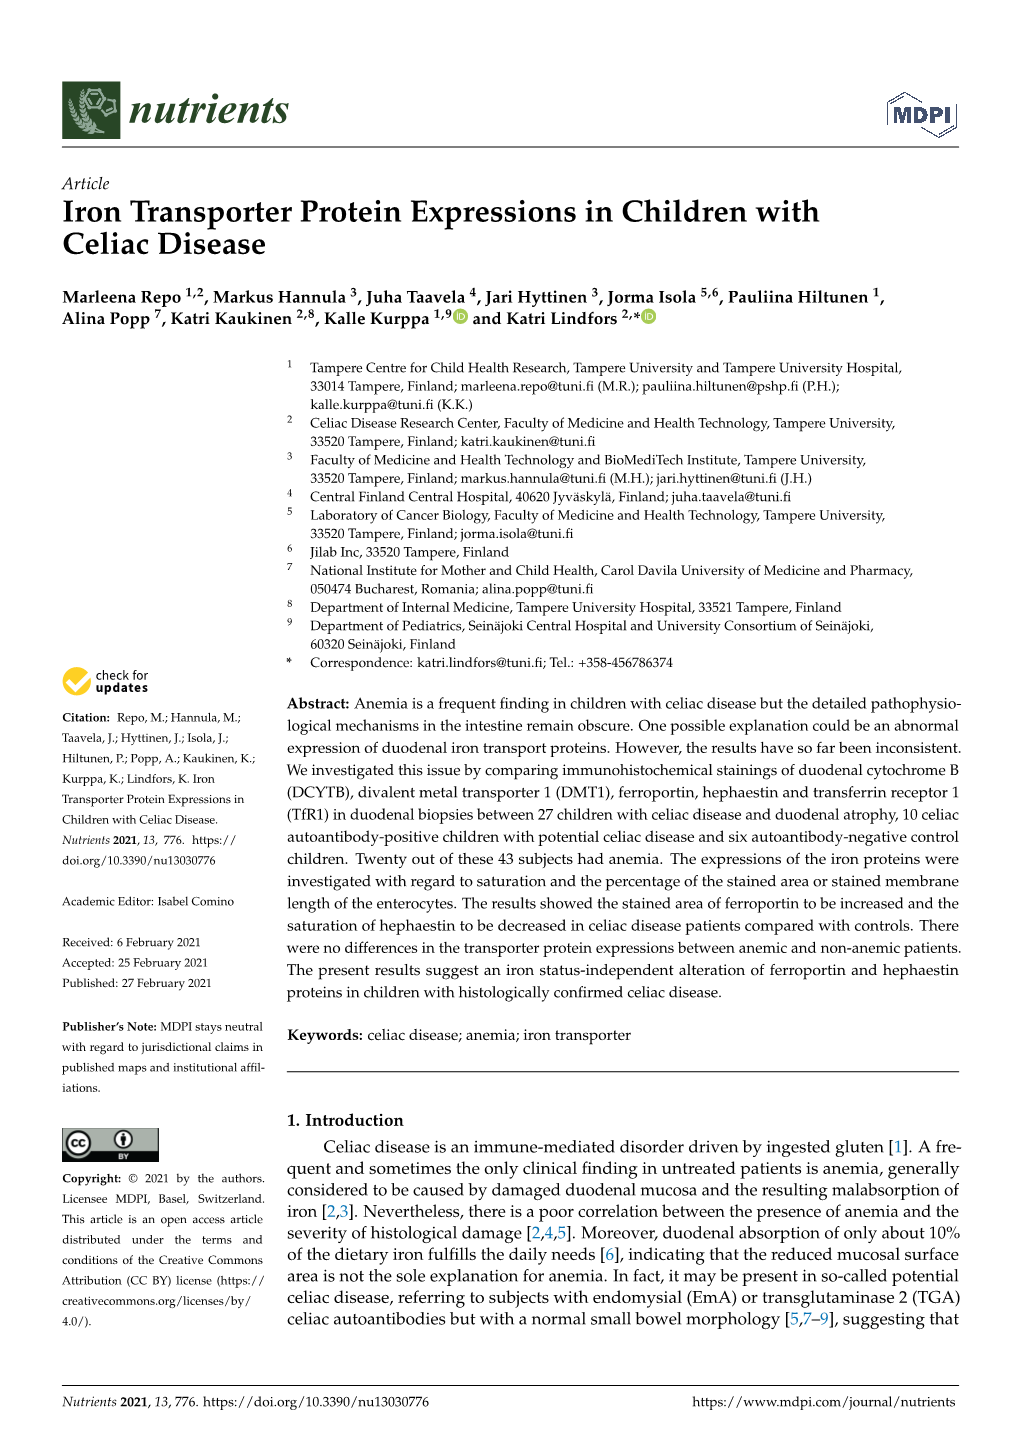 Iron Transporter Protein Expressions in Children Withceliac Disease